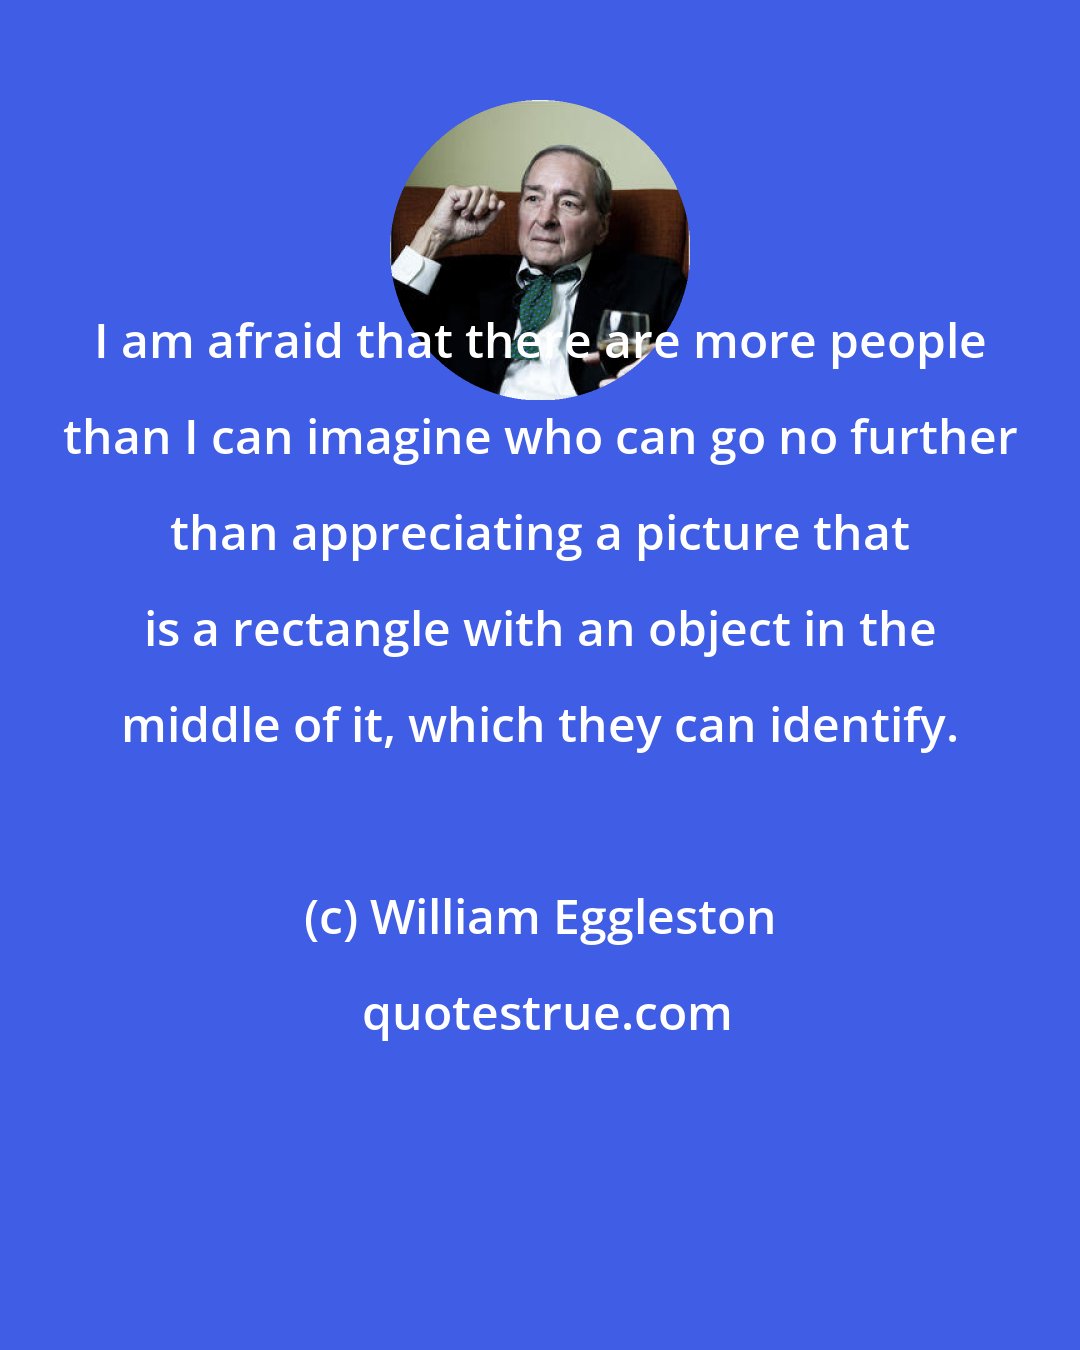 William Eggleston: I am afraid that there are more people than I can imagine who can go no further than appreciating a picture that is a rectangle with an object in the middle of it, which they can identify.